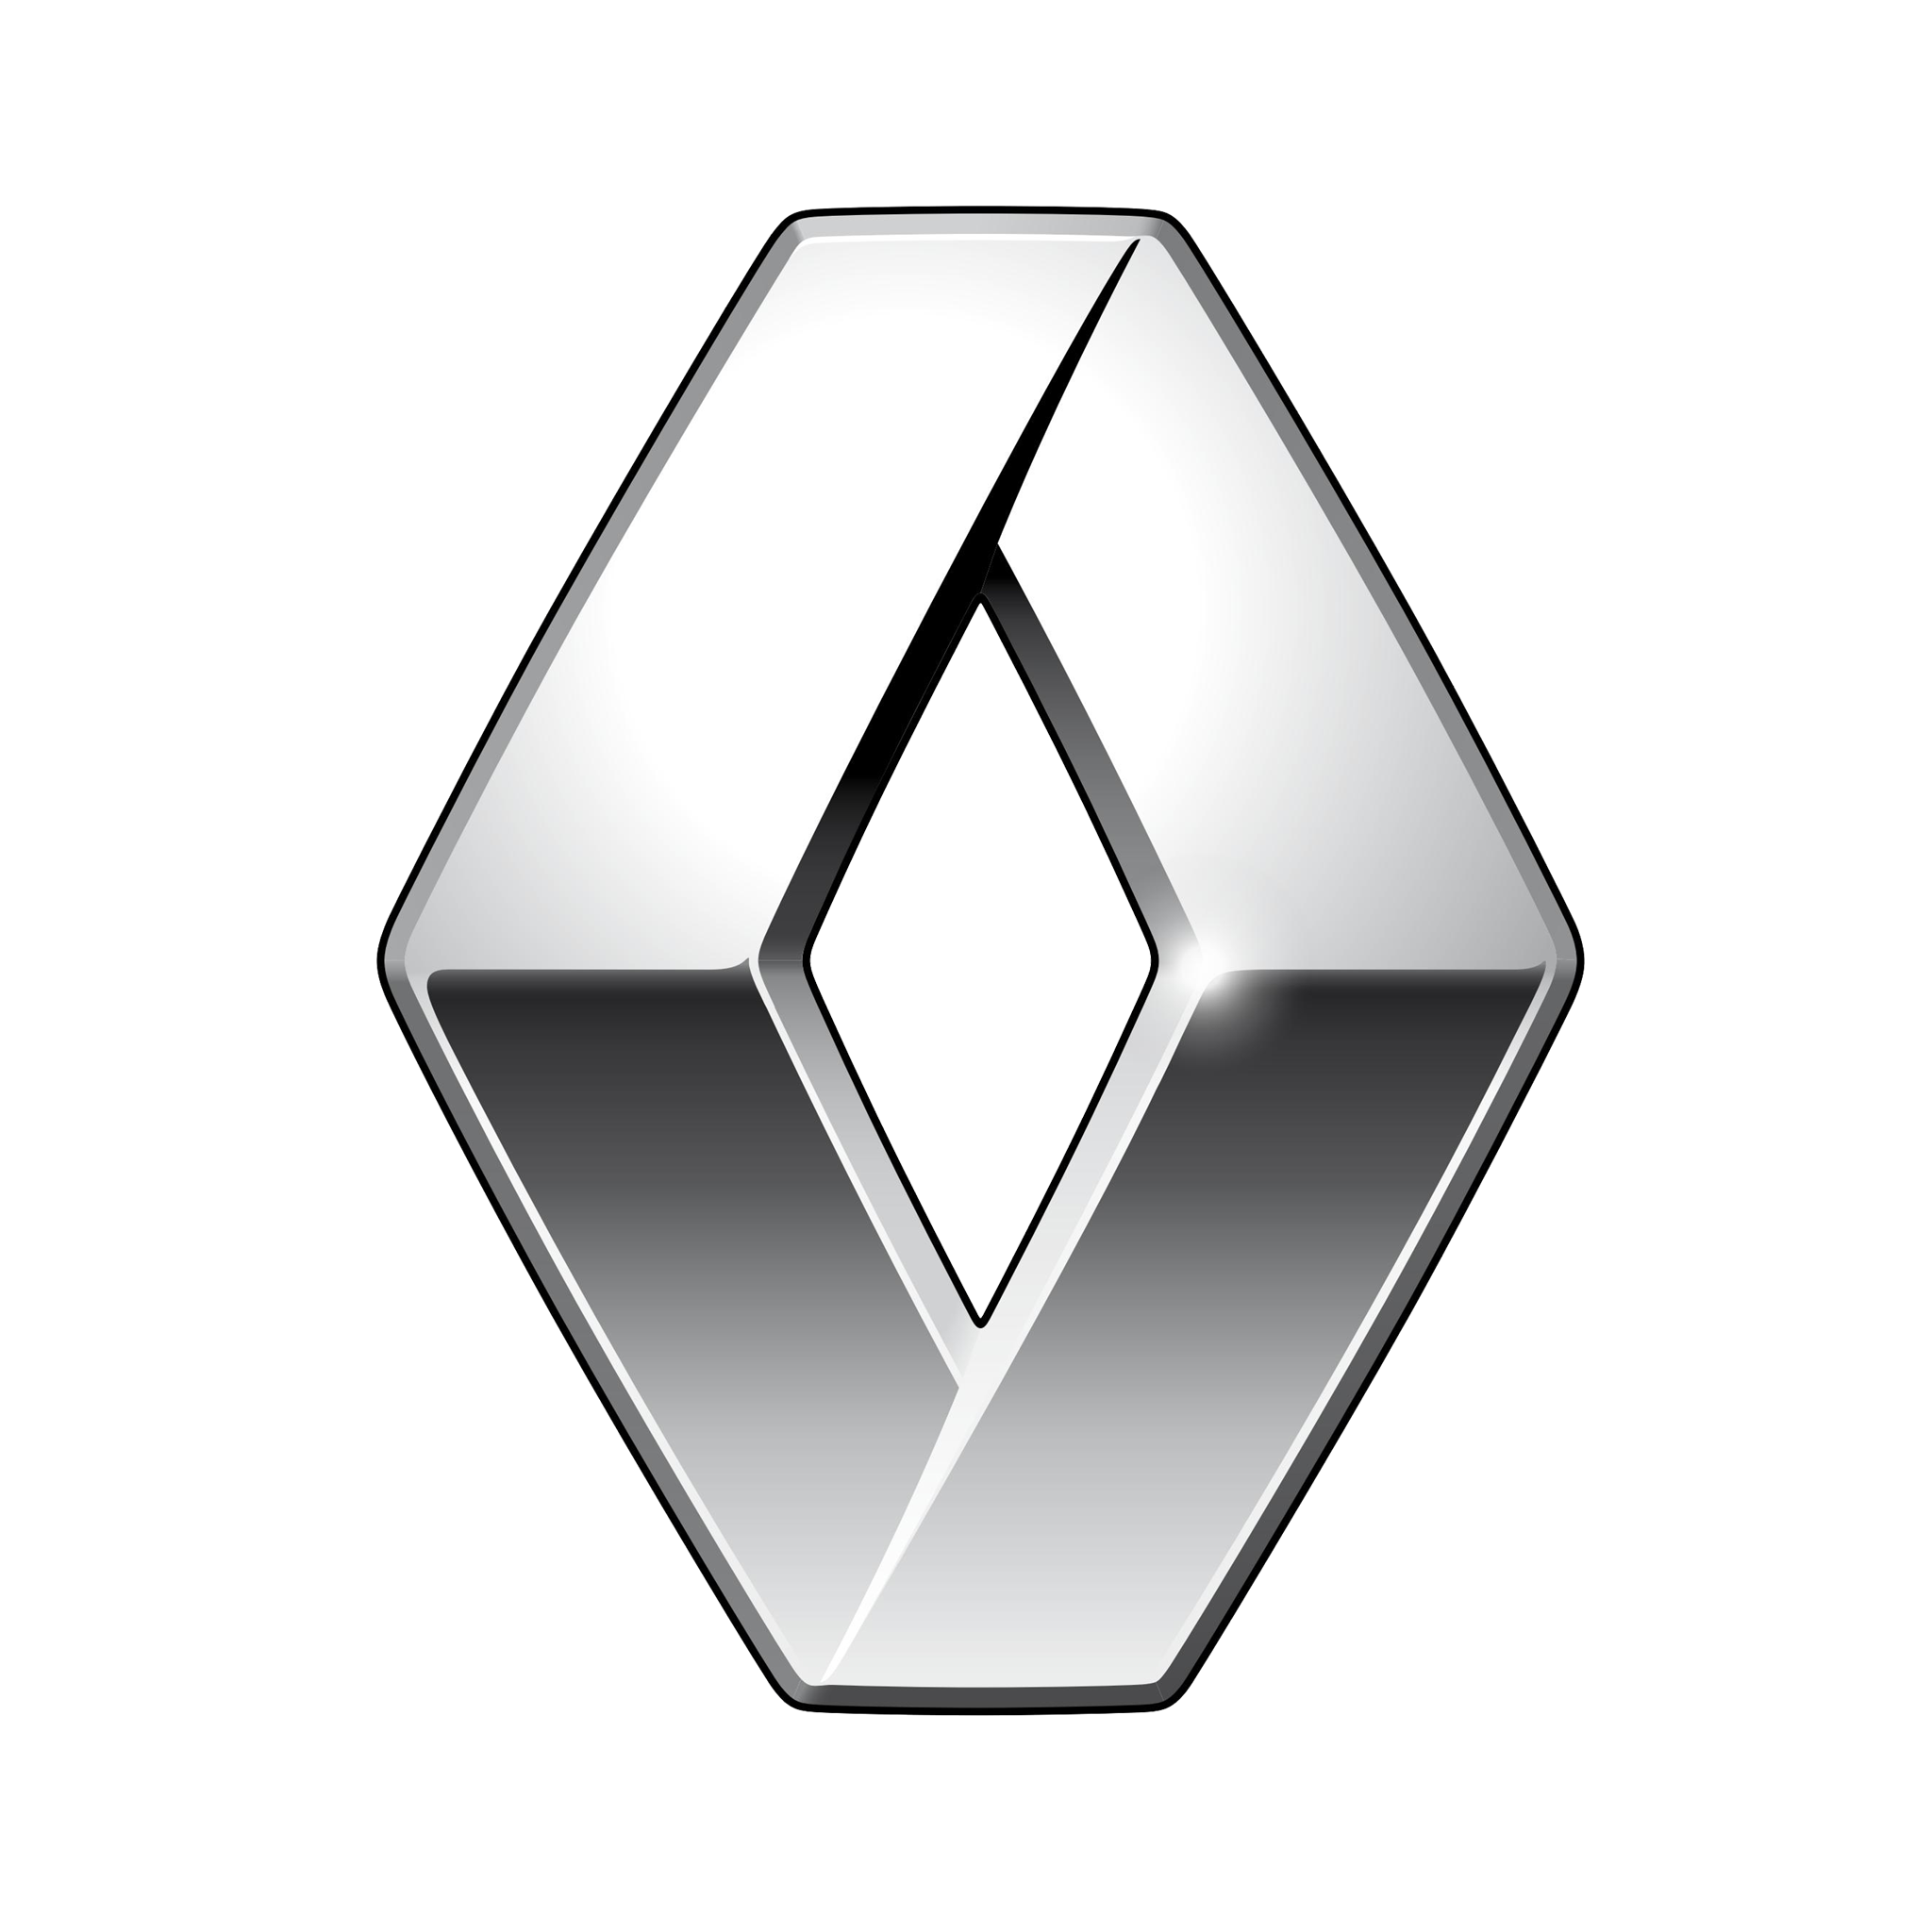 Renault Logo 256 PNG by mahes